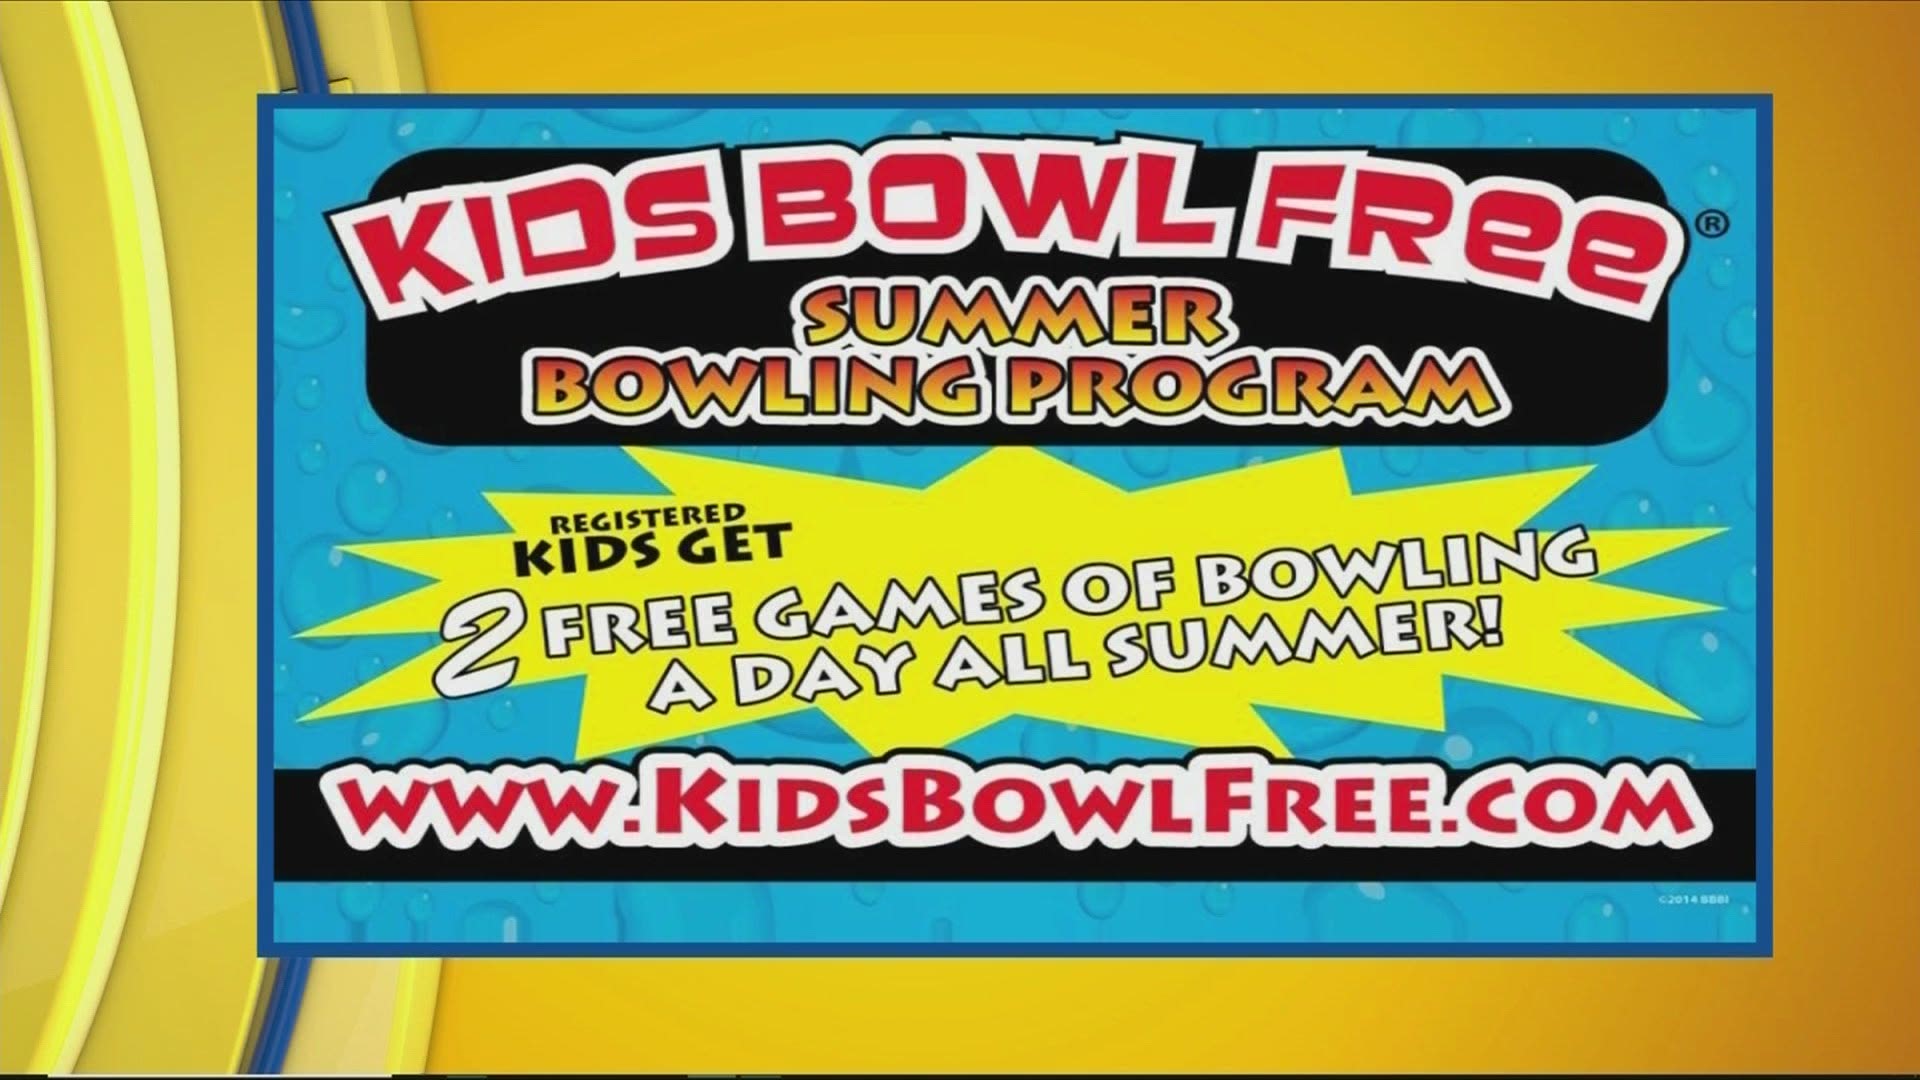 Warrior Lanes is open and kids can bowl free